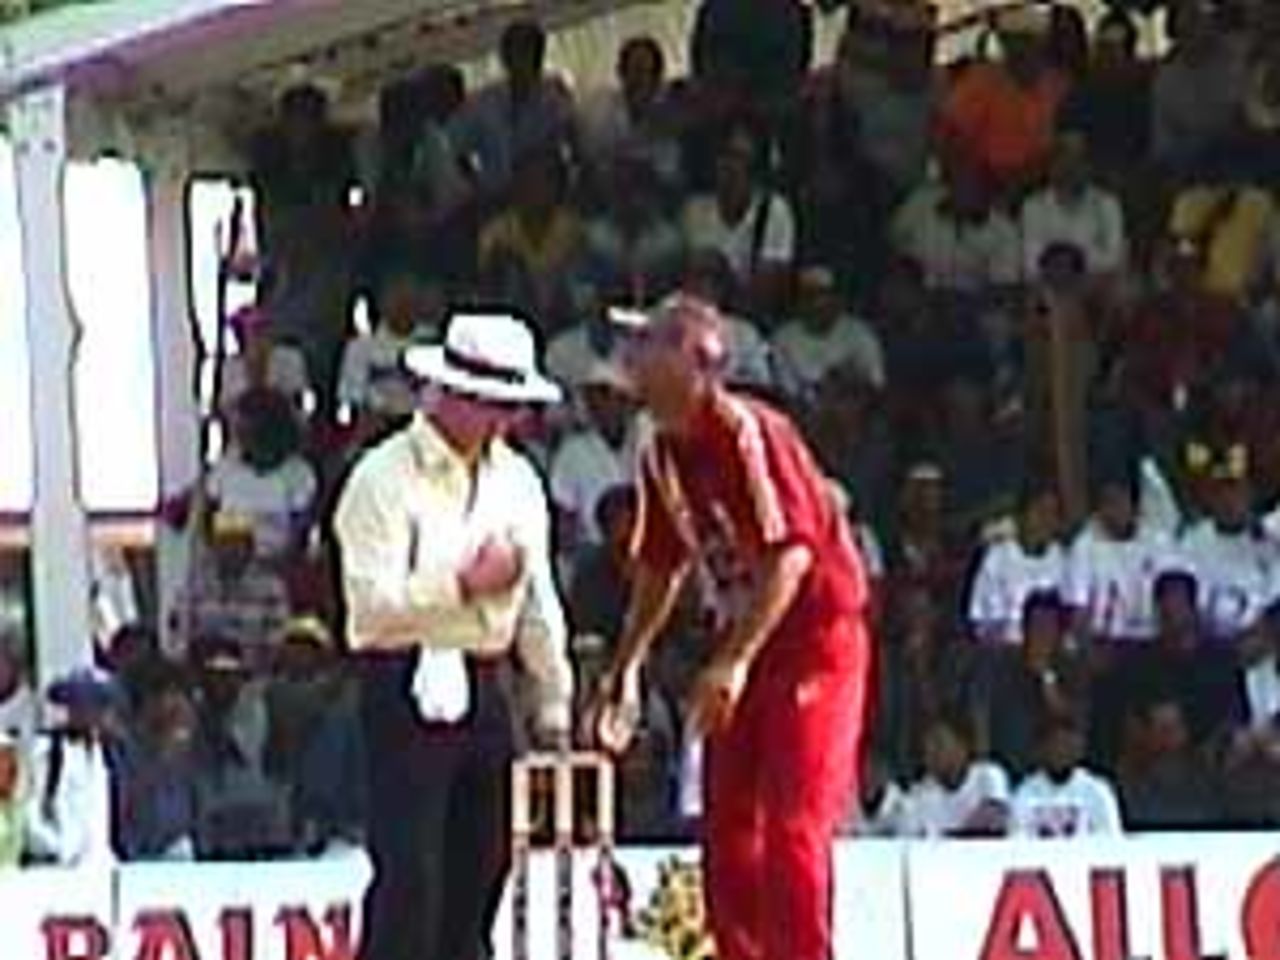 West Indies bowler and Umpire Rudi Koertzen at the stumps, India v West Indies (3rd ODI), Coca-Cola Singapore Challenge, 1999-2000, Kallang Ground, Singapore, 5 Sep 1999.